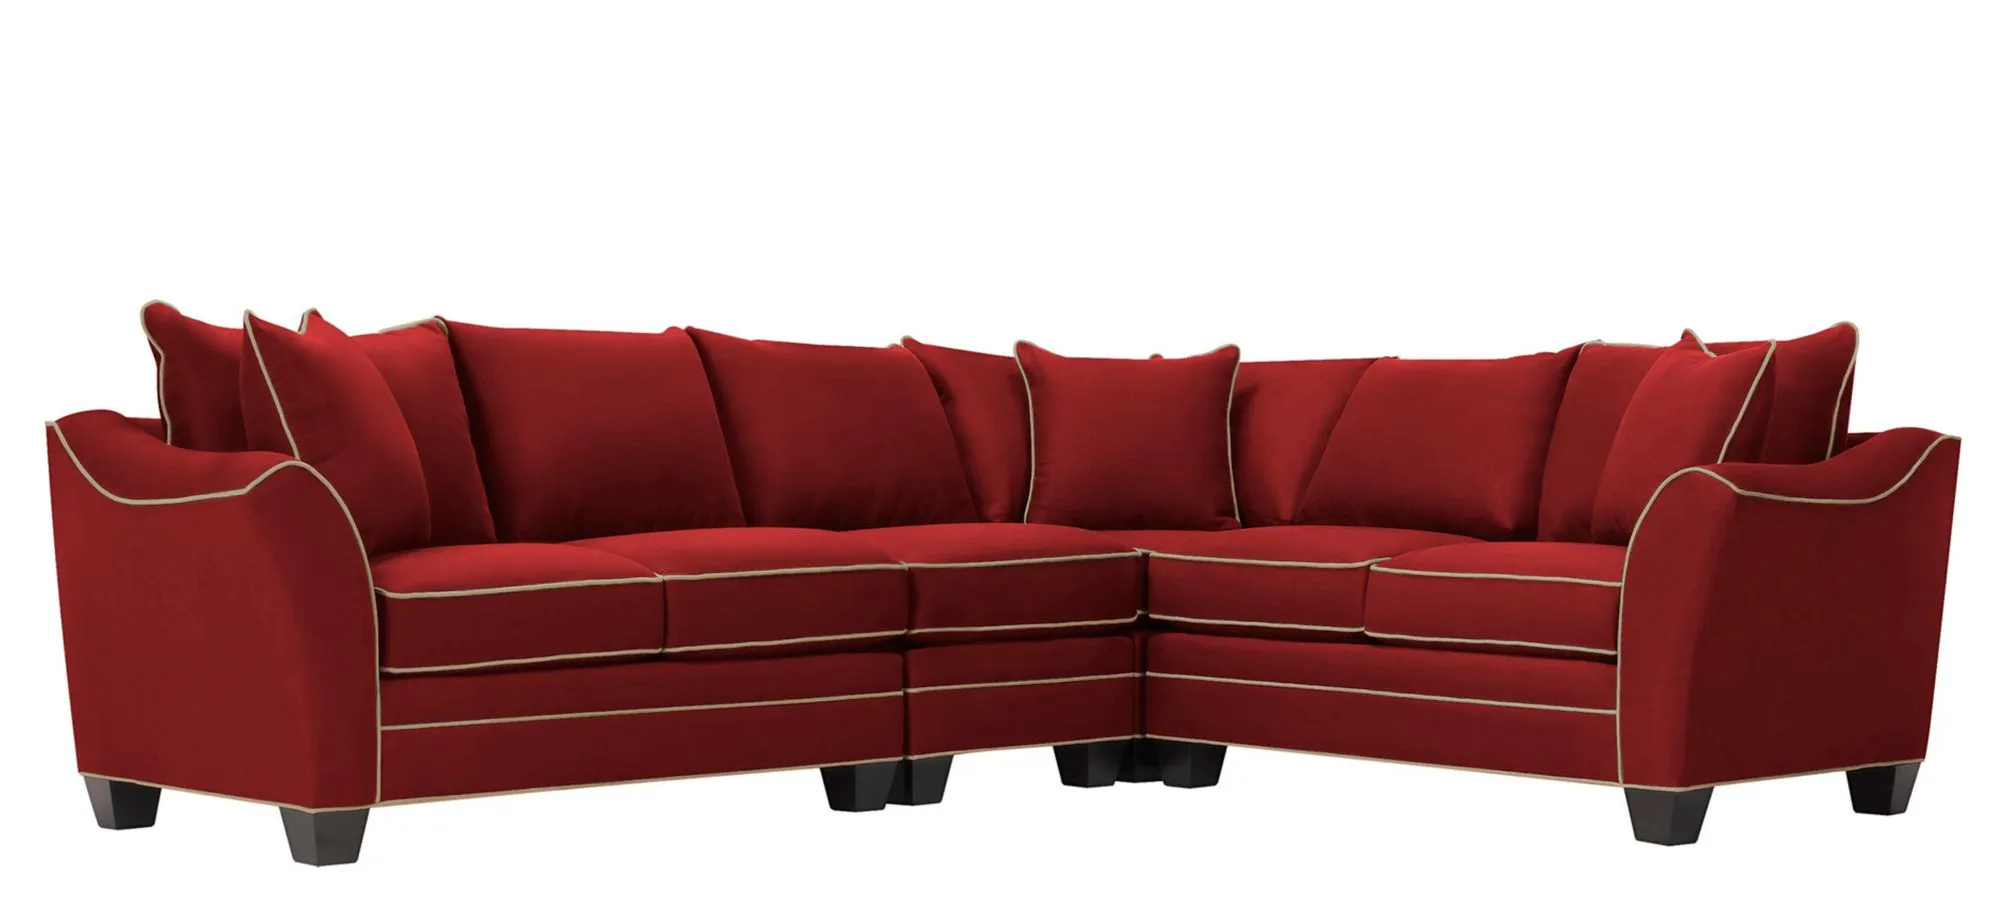 Foresthill 4-pc. Loveseat Sectional Sofa in Suede So Soft Cardinal/Mineral by H.M. Richards